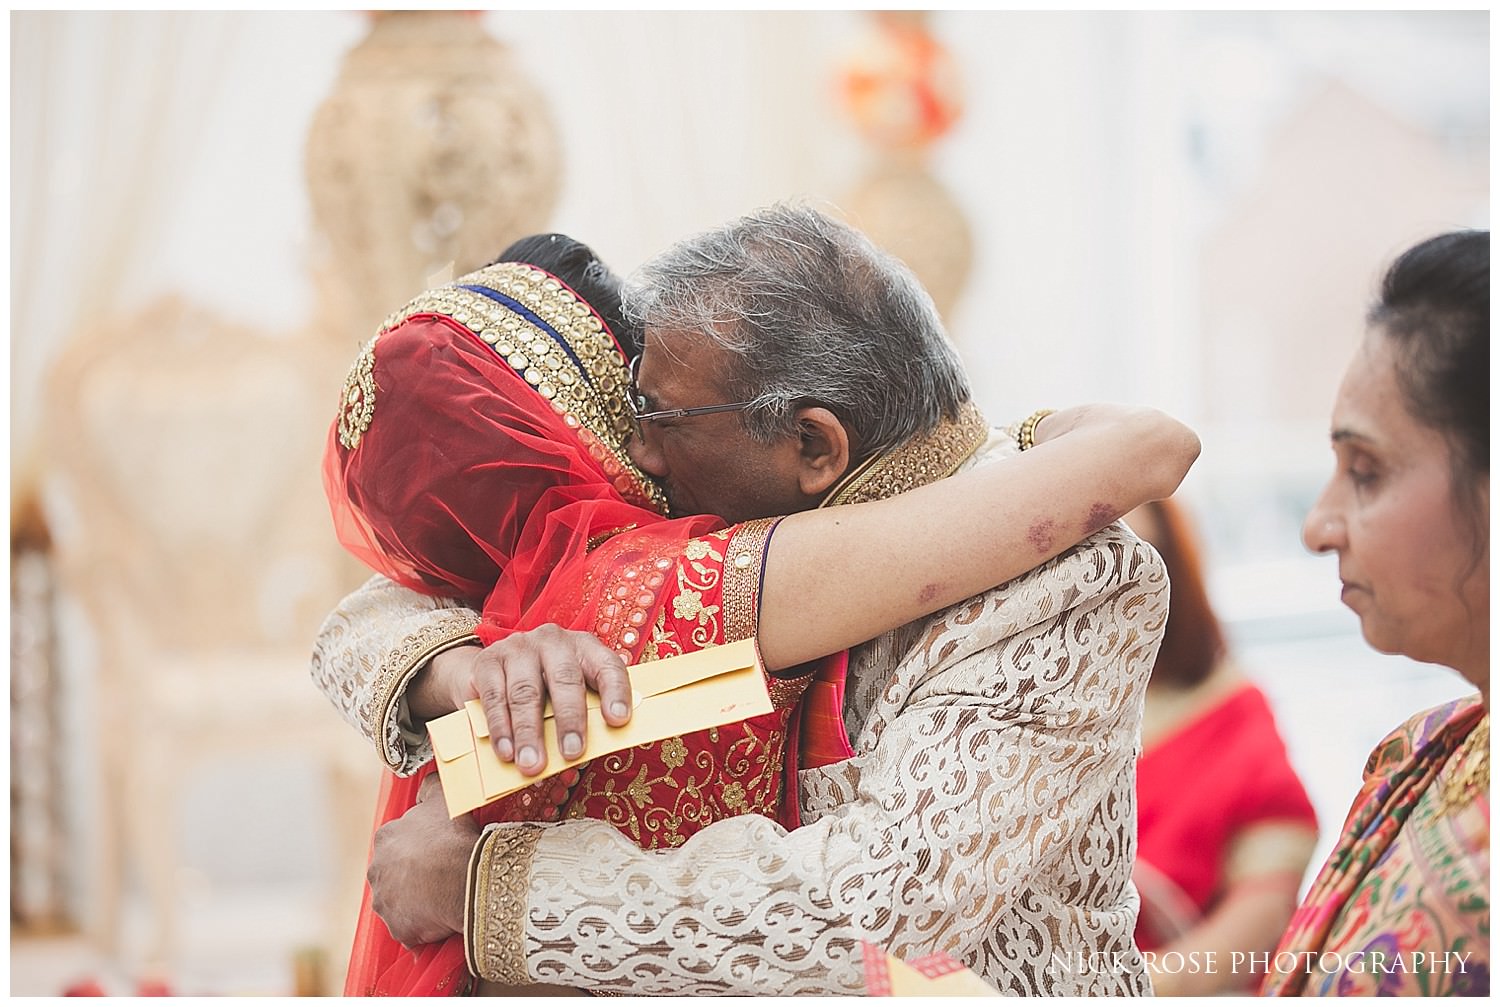  Brides father and bride's emotional farewell during the Hindu wedding viddai at East Wintergarden in London 